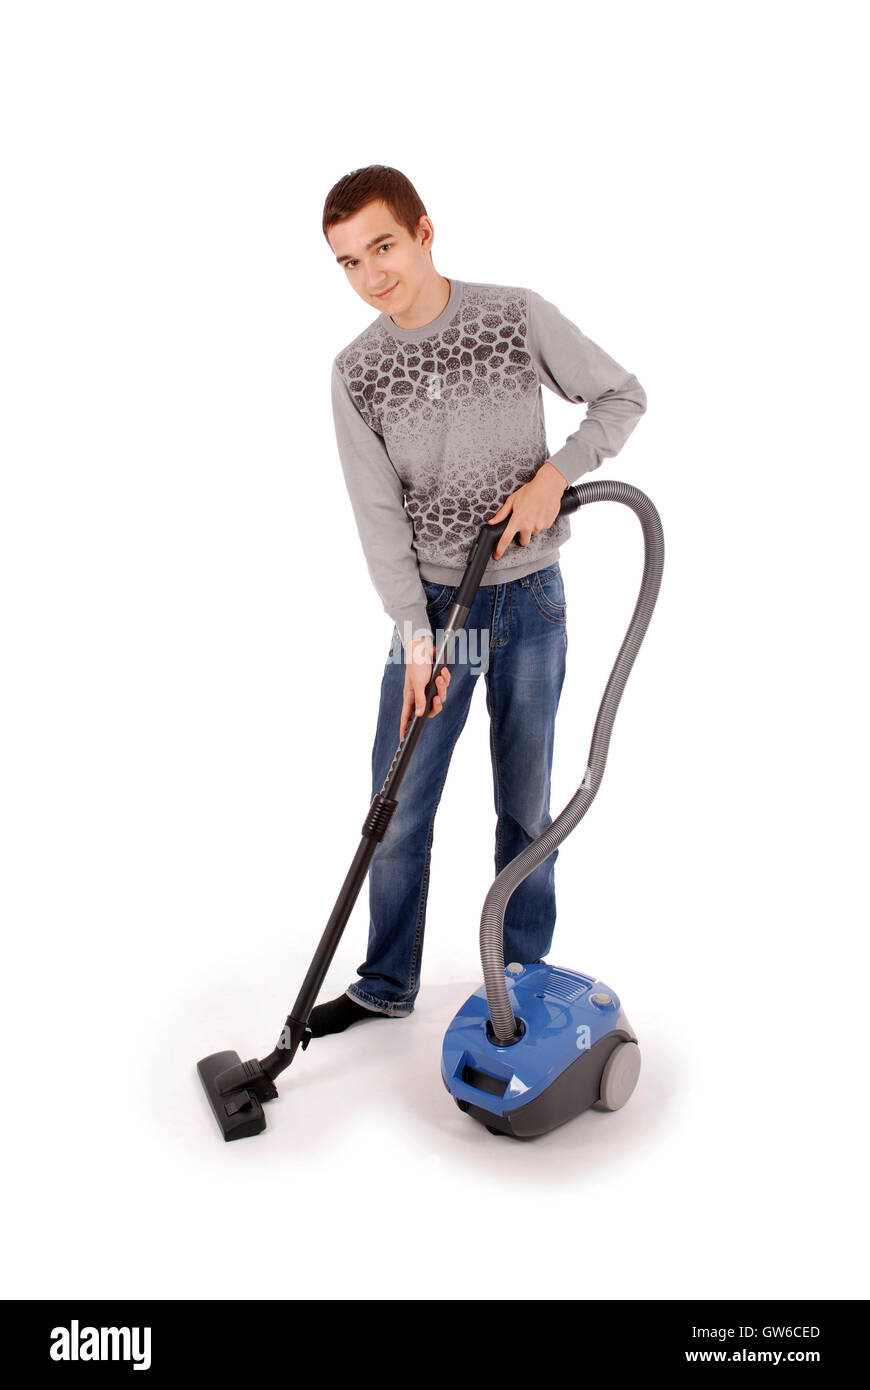 Boy with vacuum cleaner isolated on white background Stock Photo